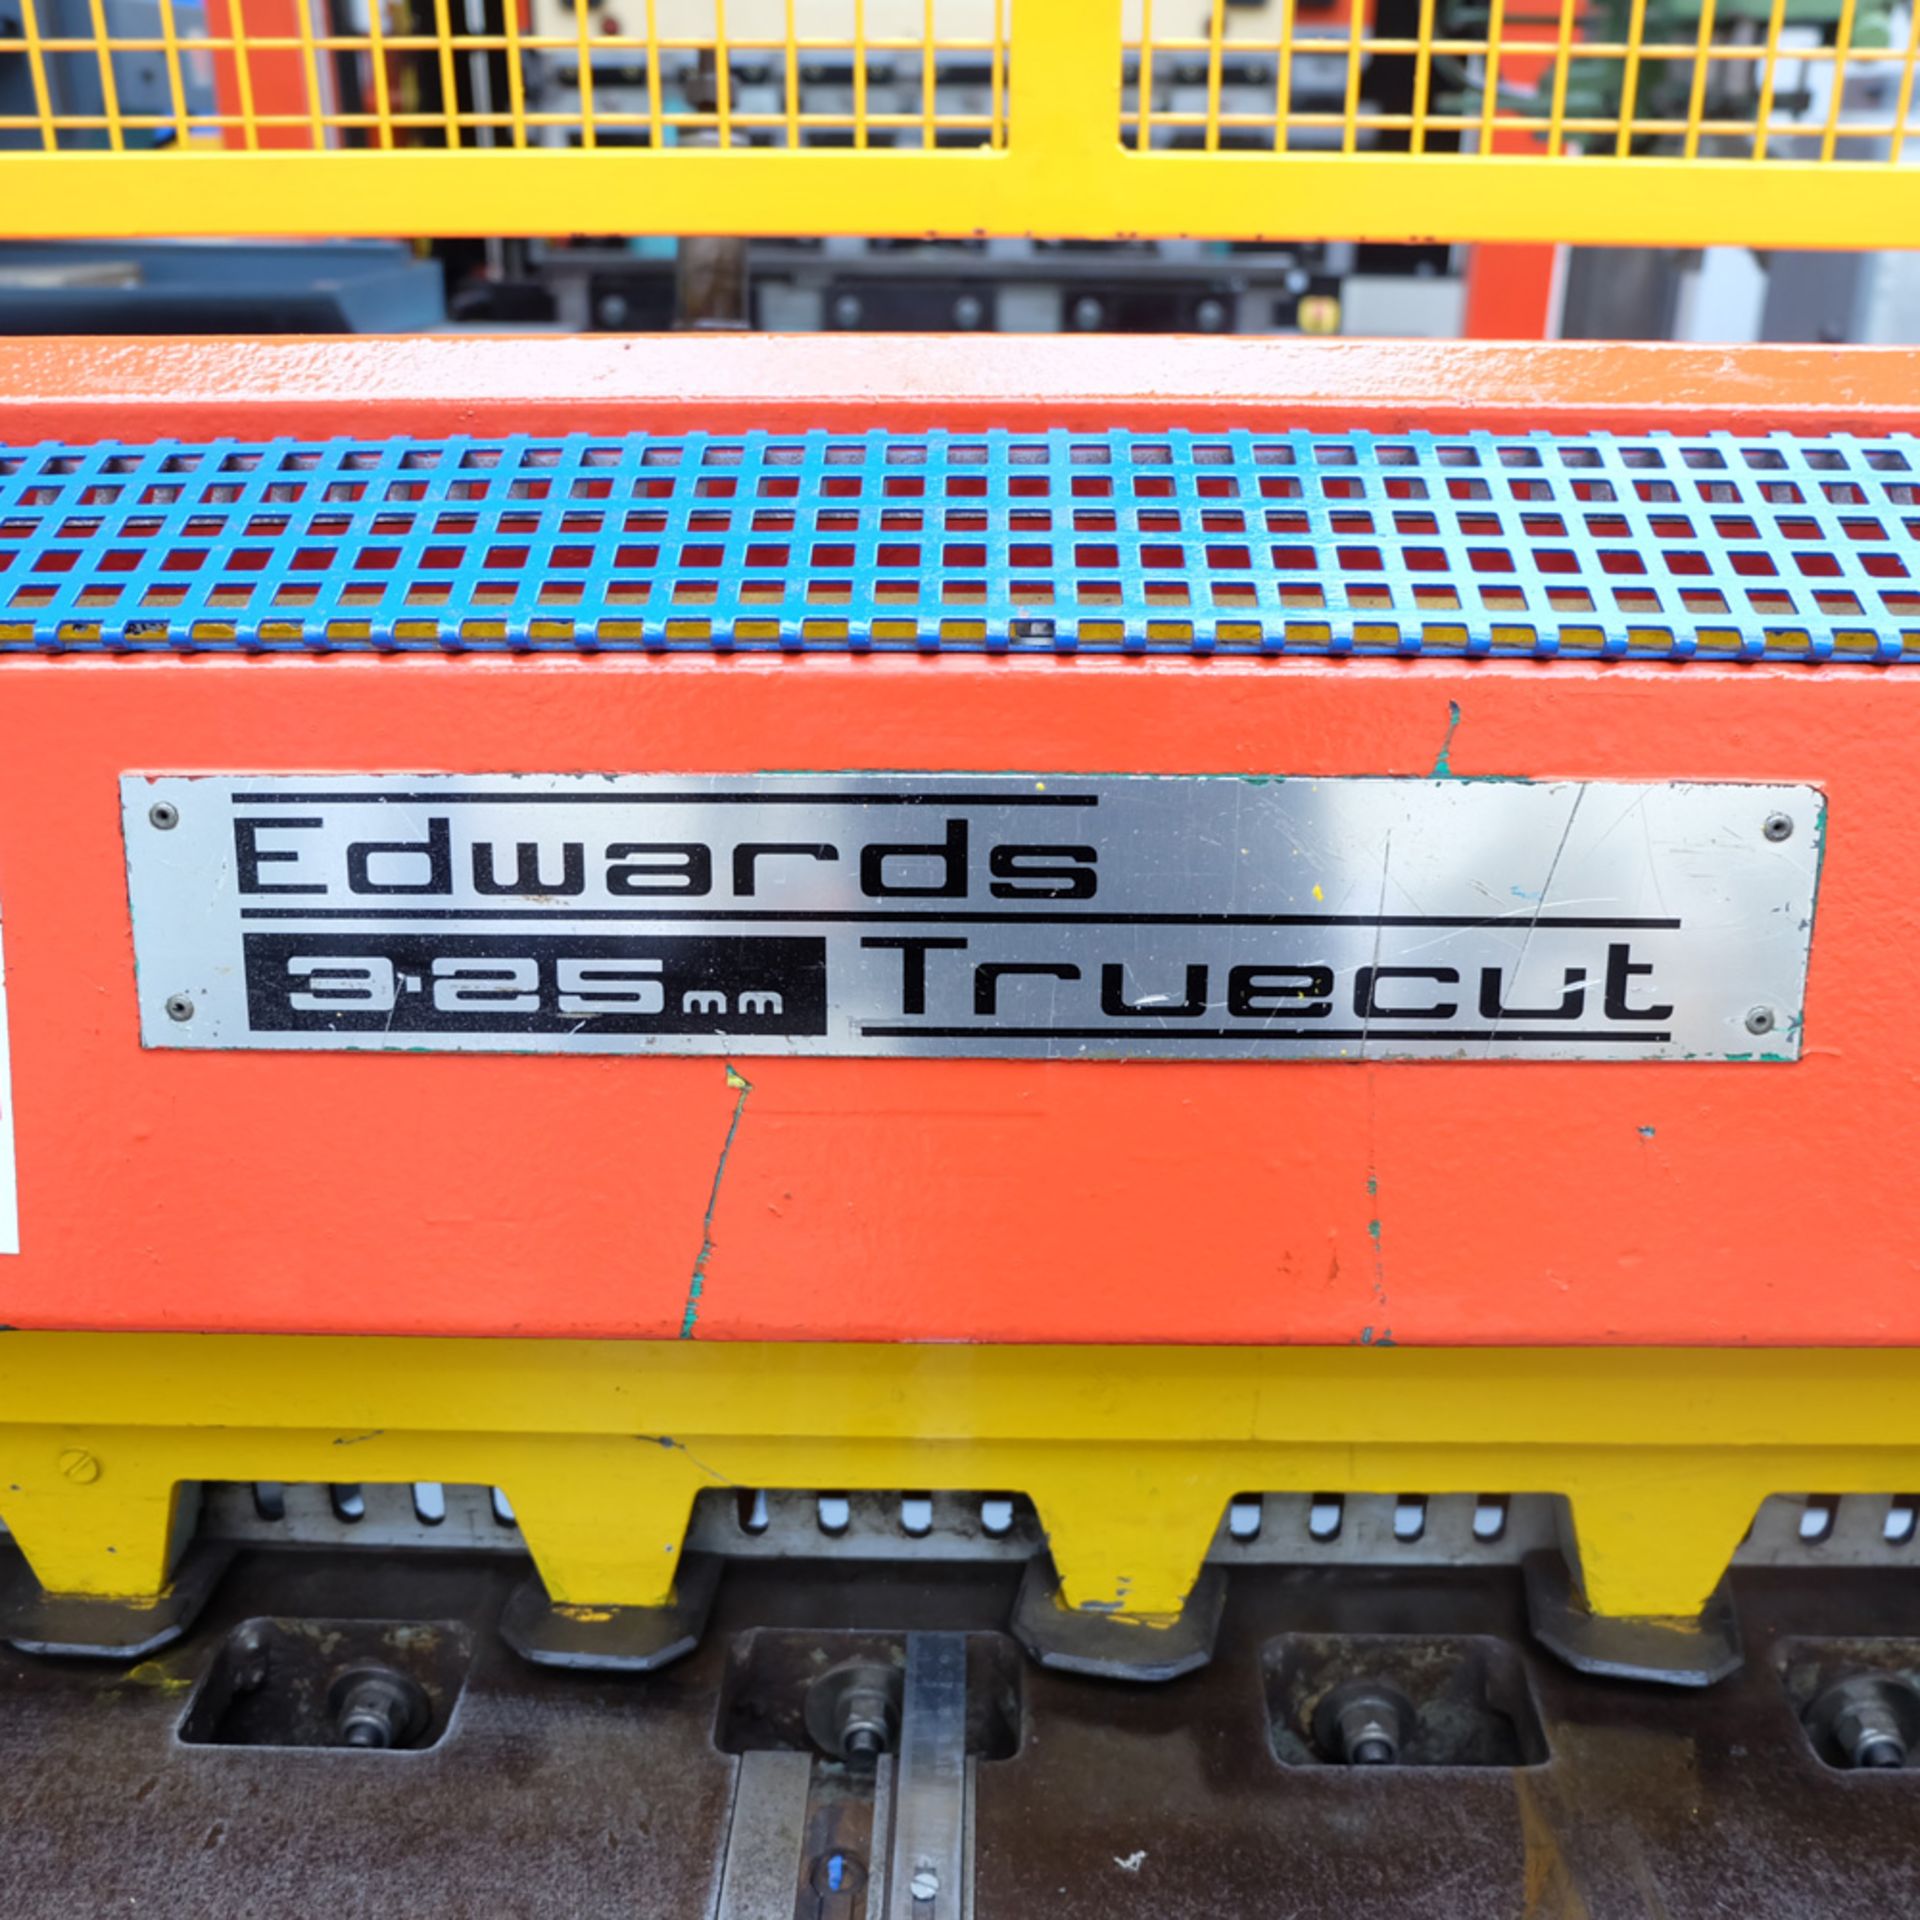 Edwards Truecut Powered Guillotine. Capacity: 3.25mm. Blade Length: 2500mm. - Image 4 of 10